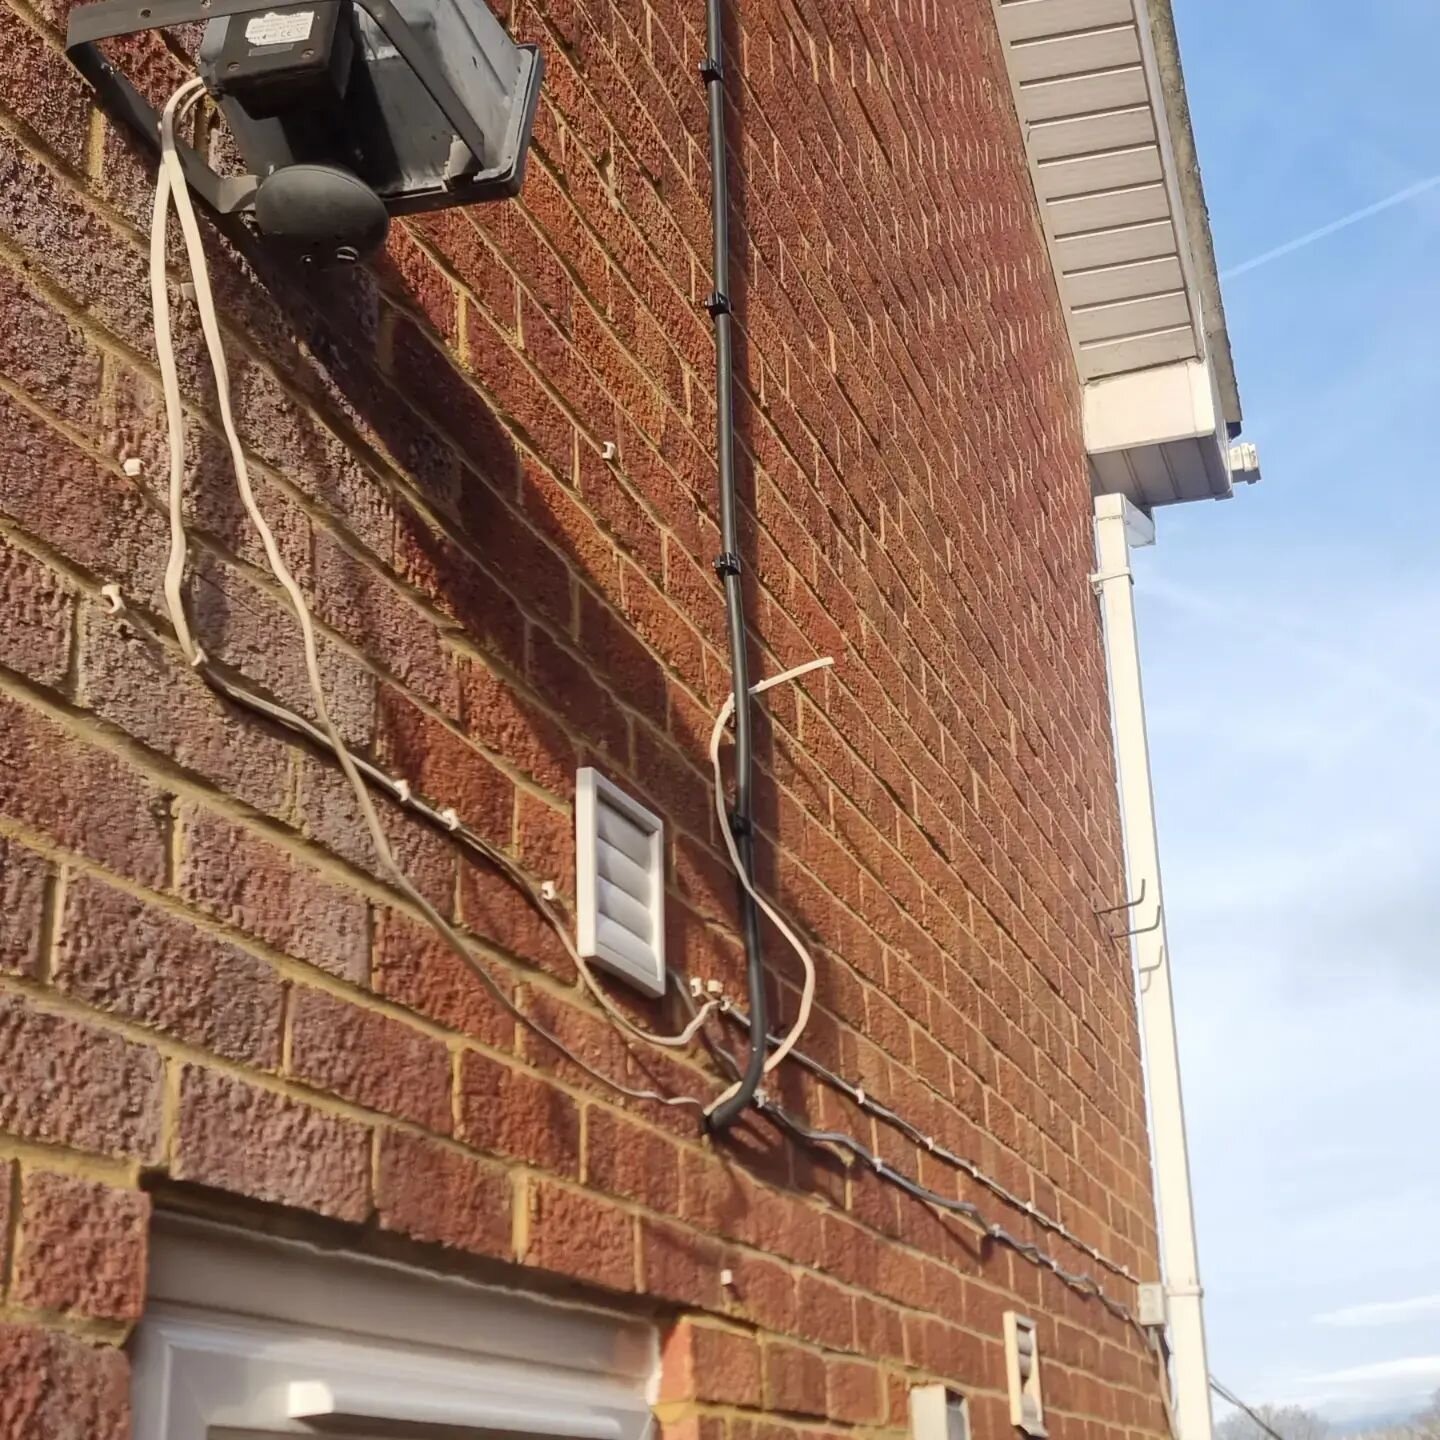 It's not all about the big jobs.  Sorted this DIY wiring down the side of the house after an EICR for a customer in Wokingham.  Now nice and tidy, correct cable used, with adequate support.  The sun's out too!

#electrician #electriciansuk #handtools